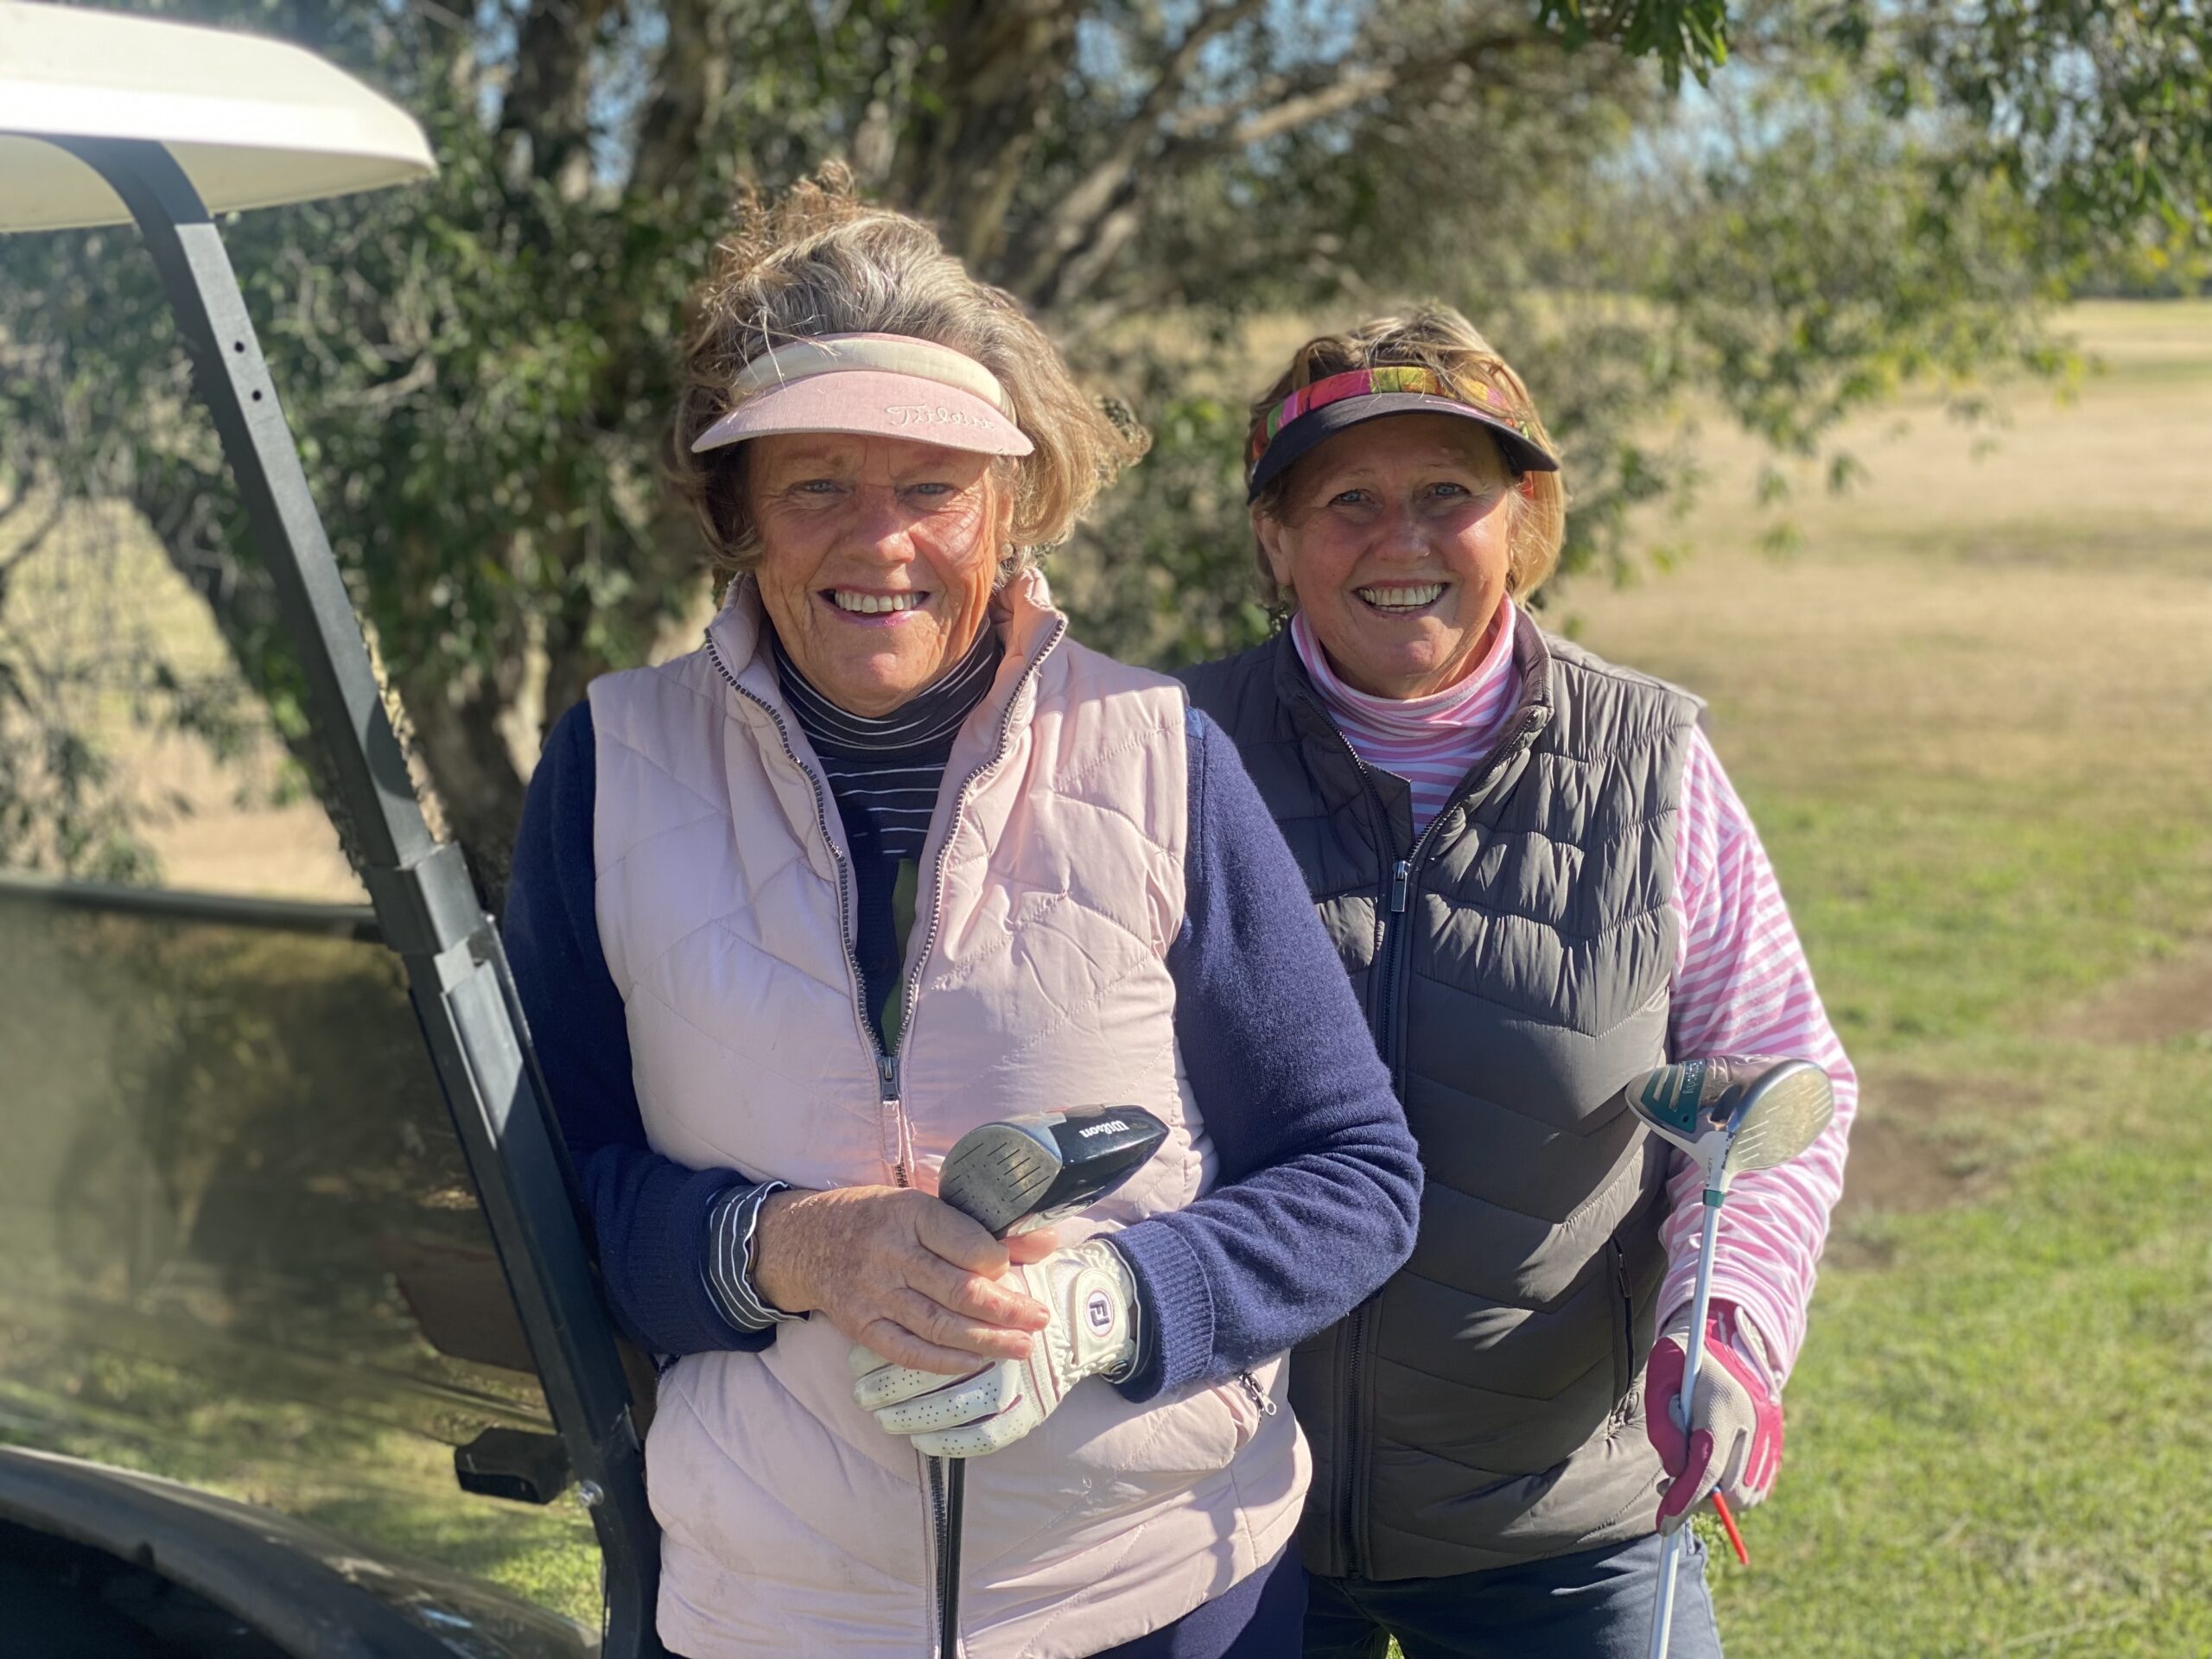 Mandie Freeman and Sally Boyle at the Ladies’ Golf Open on Sunday.